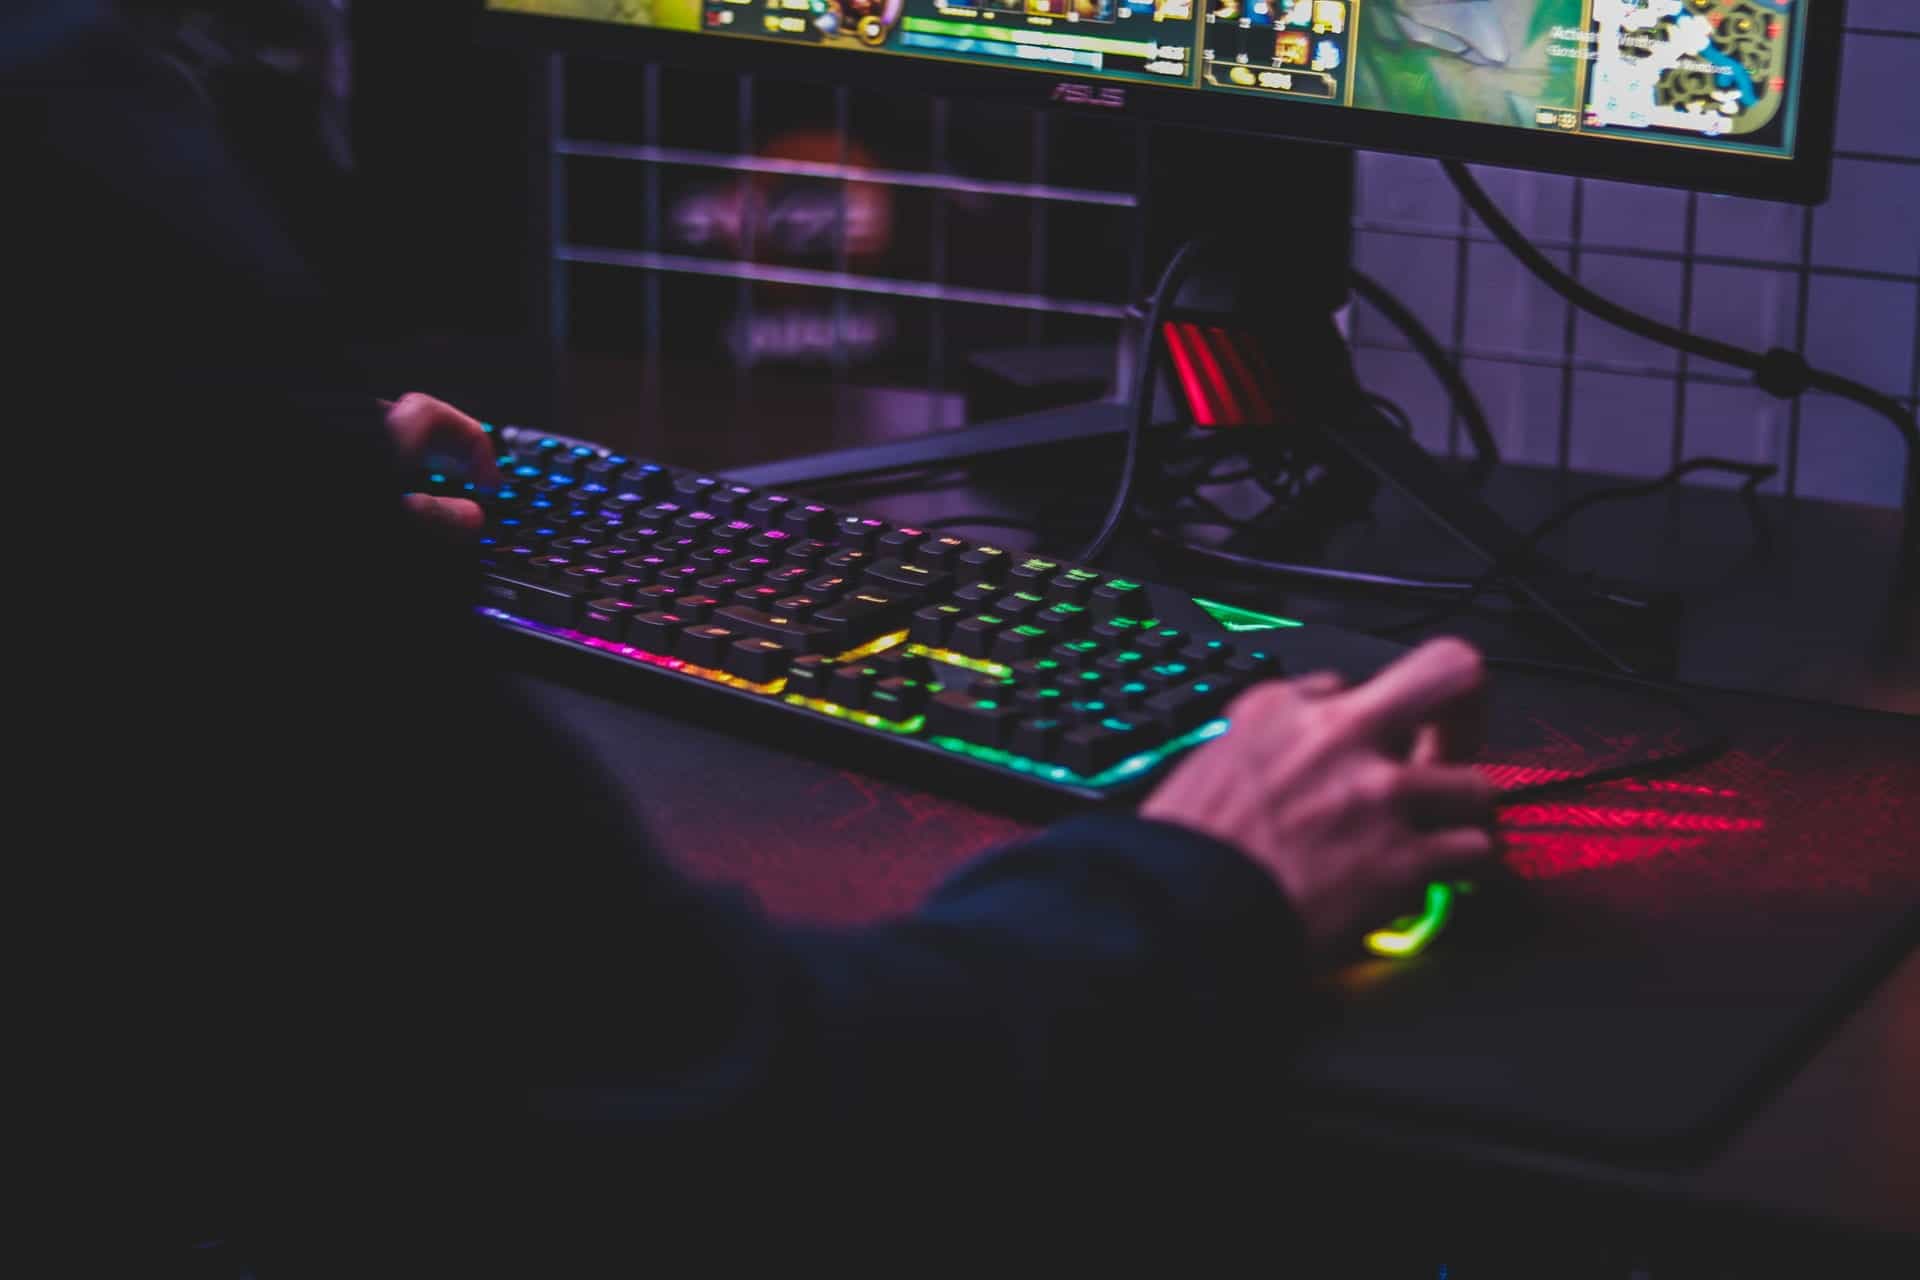 A closeup of a colorfully-lit gaming keyboard and hand as a person plays an immersive video game on a large computer monitor.